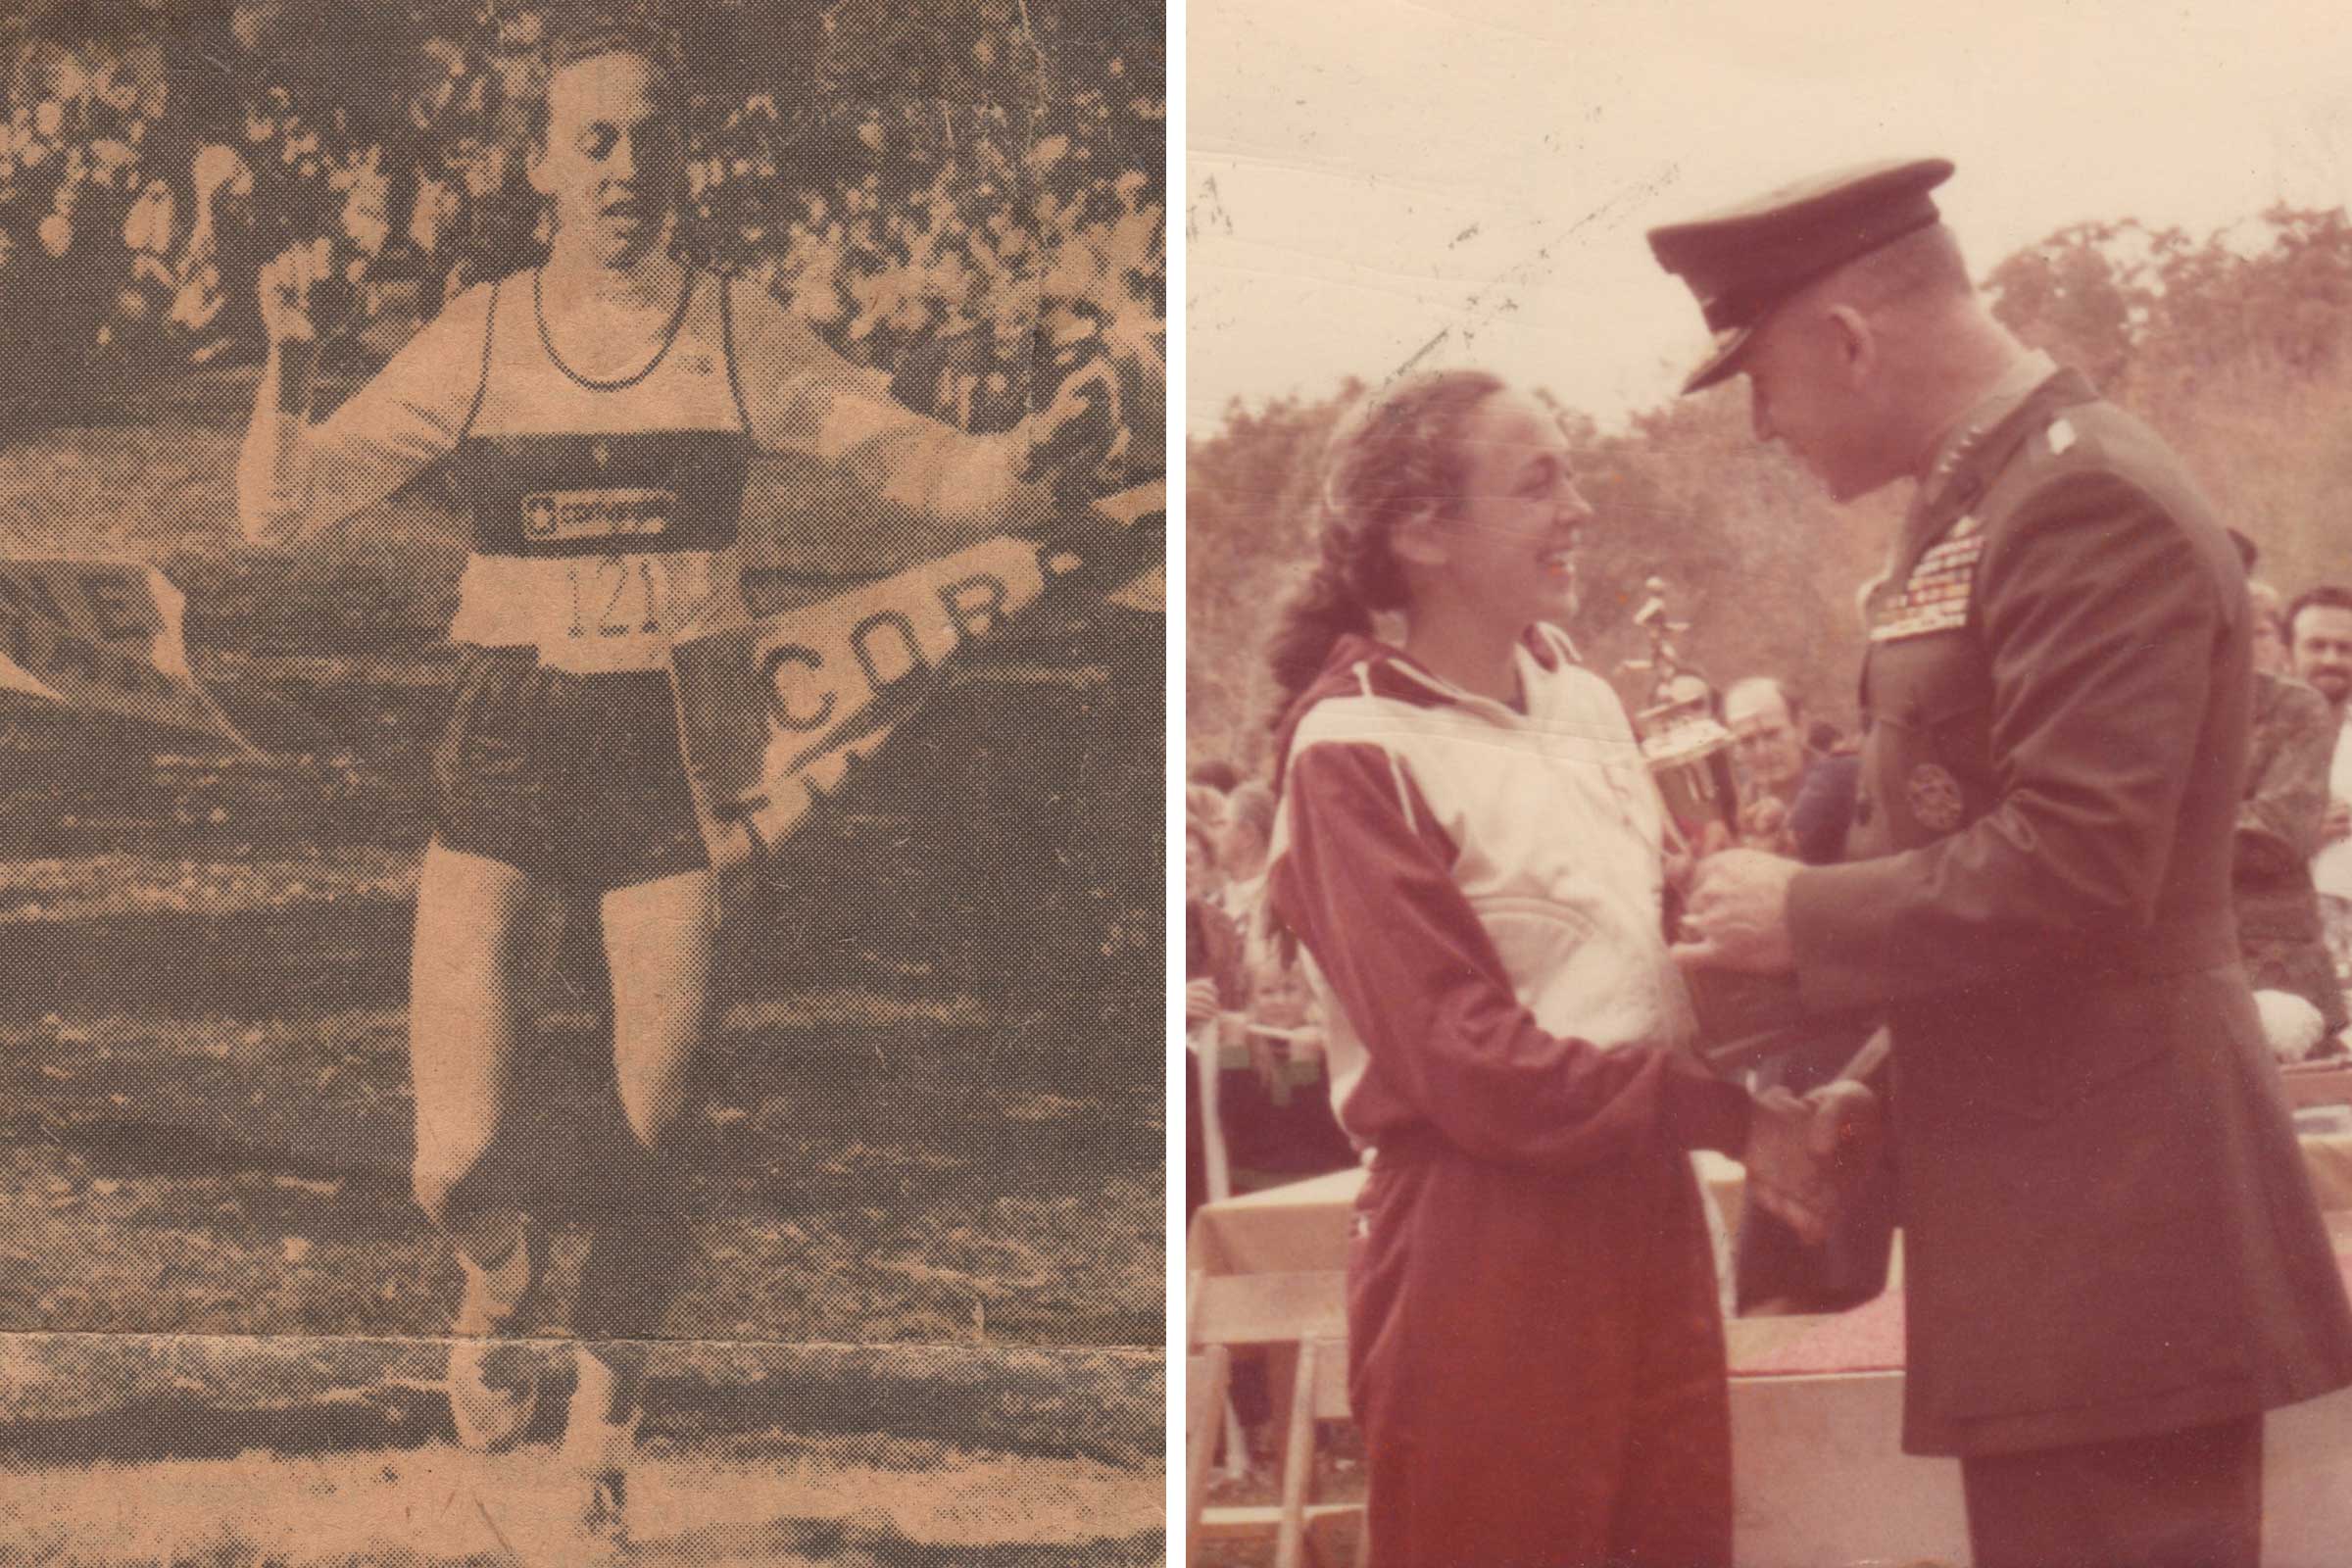 A newspaper photo of Cynthia Lorenzoni running across a finish line and an old photo of her shaking hands with a man in a U.S. Marines uniform